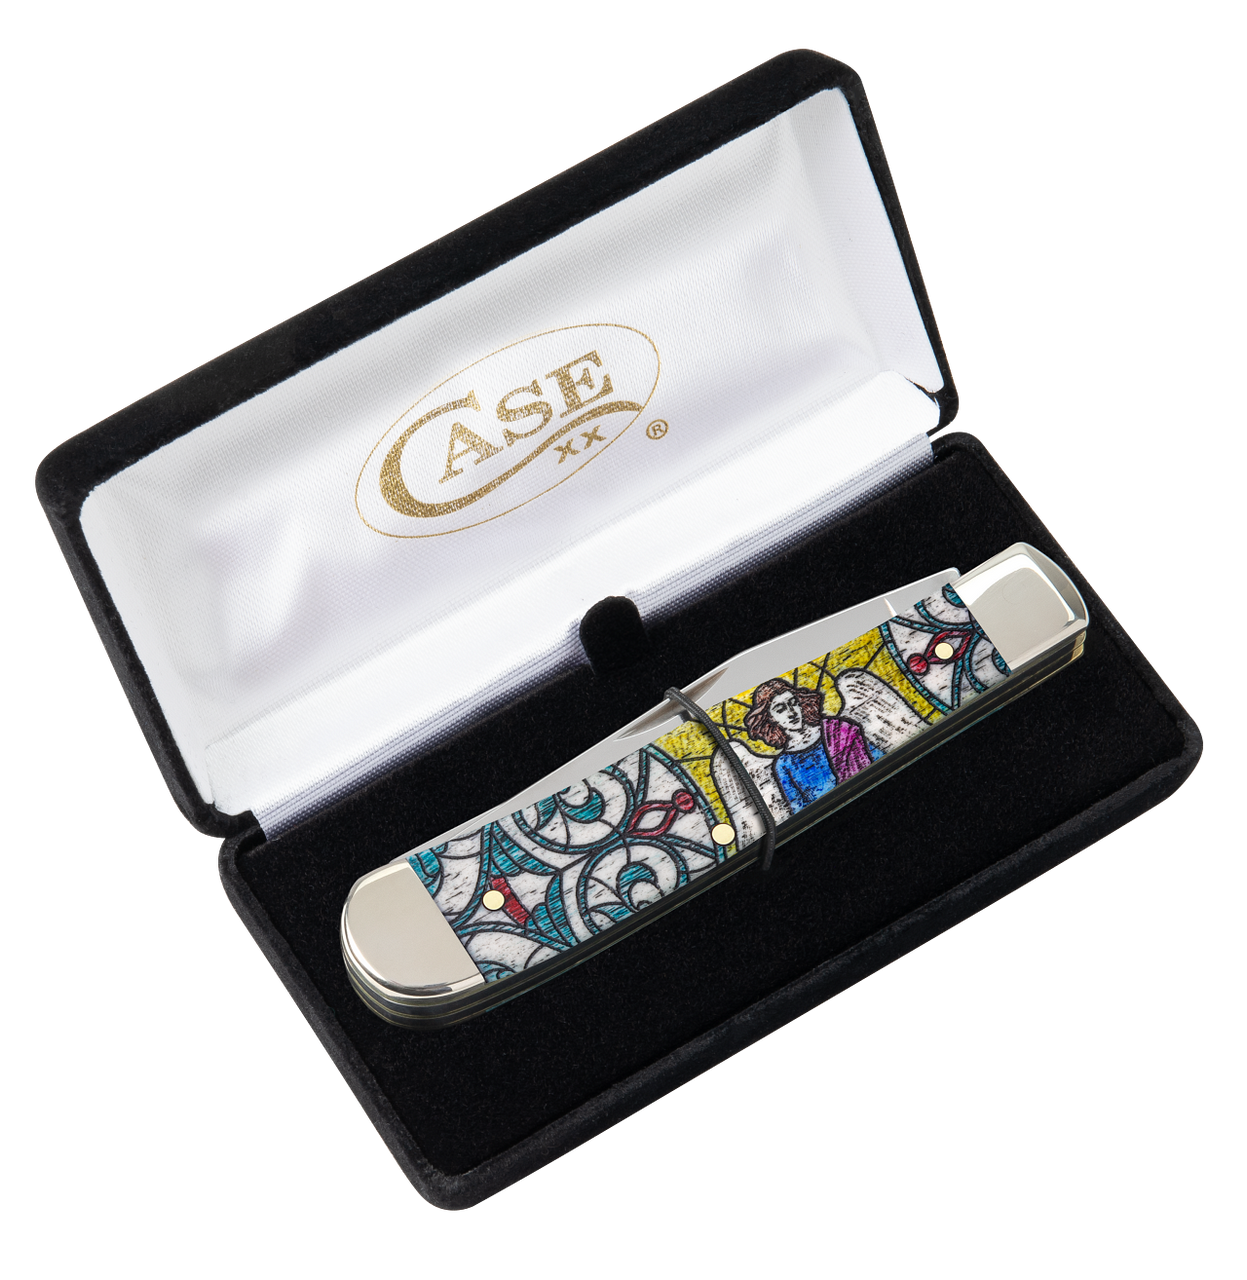 Case XX Trapper Clip, Spey Blade Stained Glass Angel Natural Bone - 38818